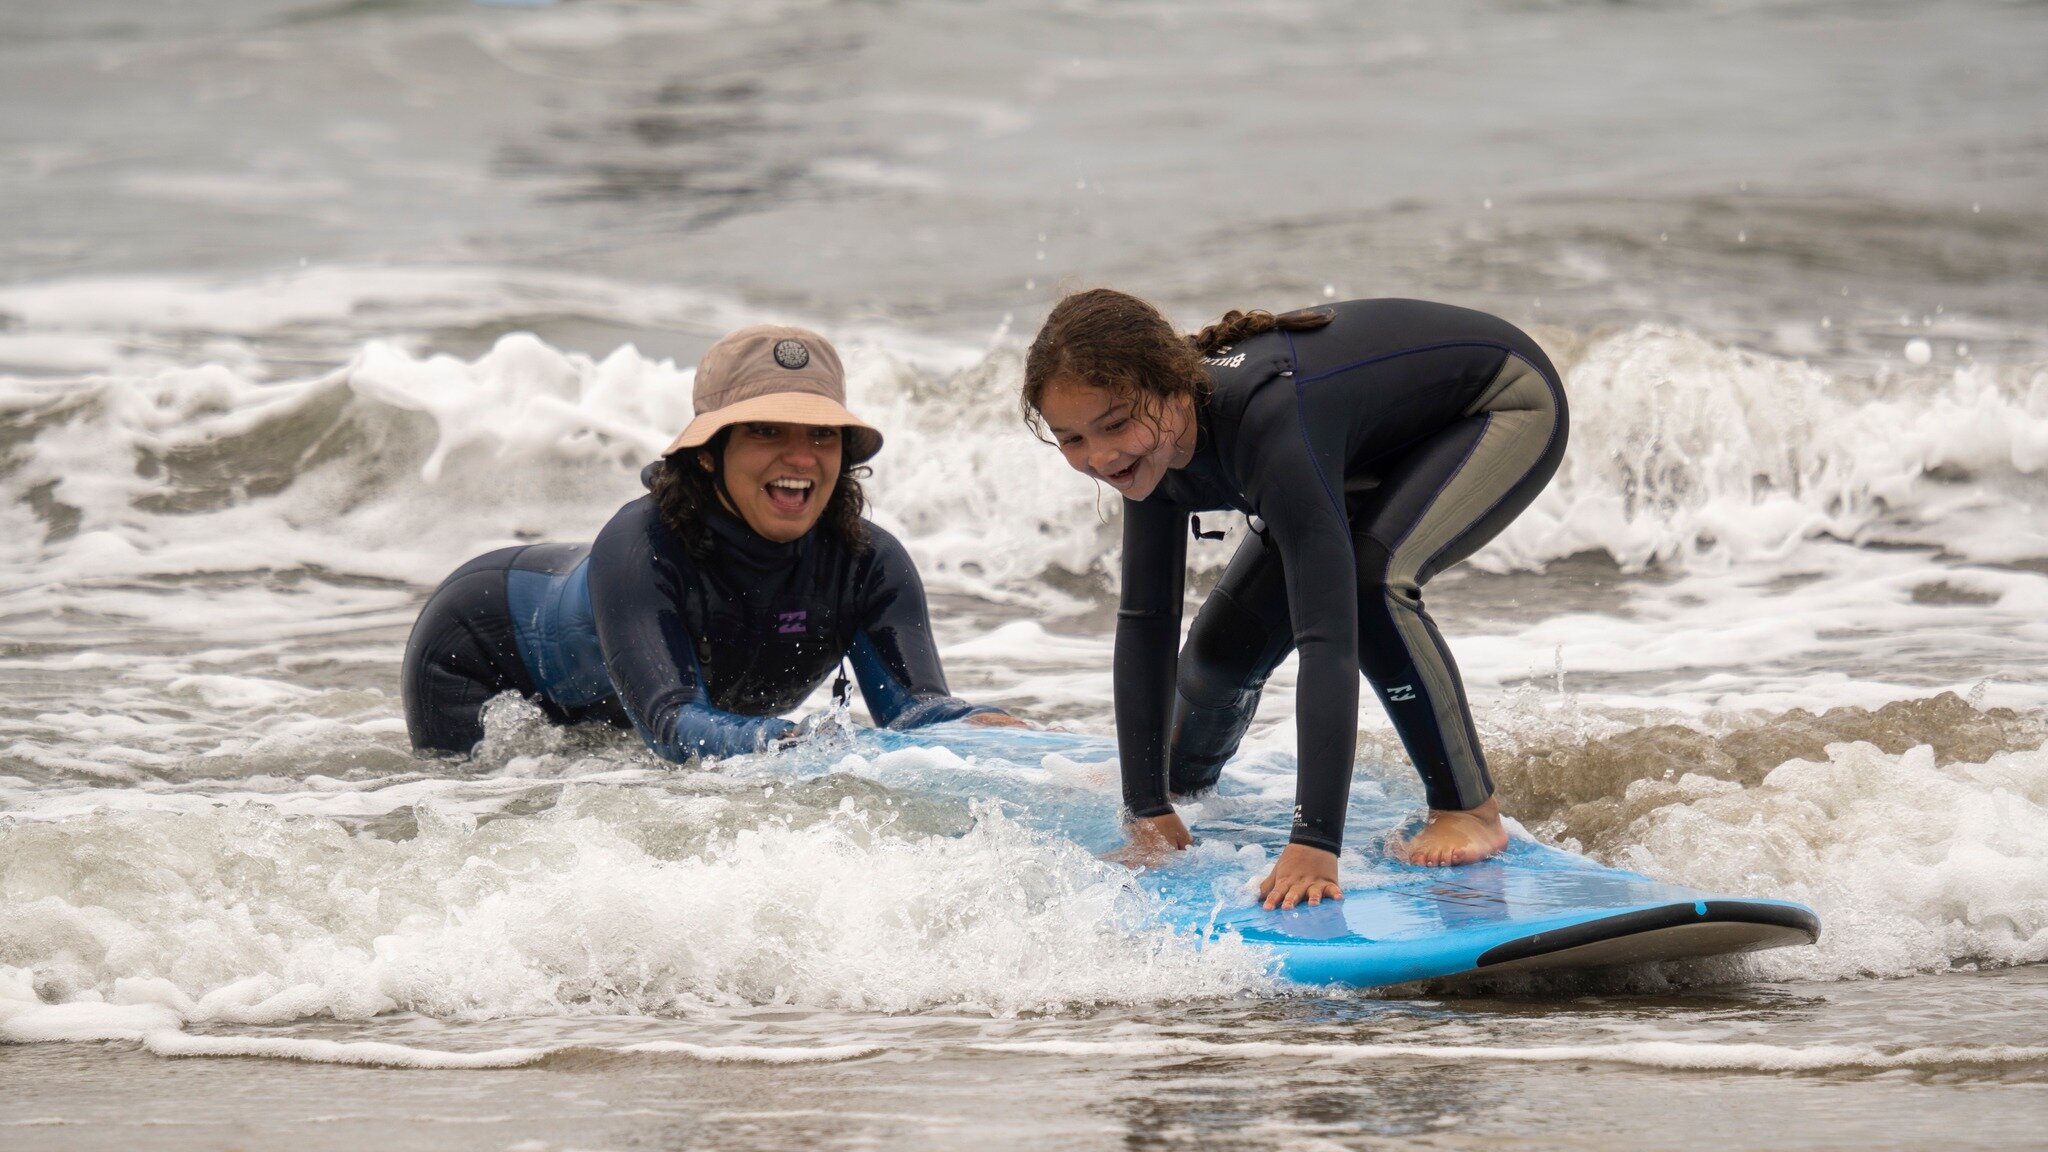 Happy National Girls and Women in Sports Day! It's estimated that only 19% of the worlds' surfers identify as female. At CSP one of our pillars is to break down the social, cultural, and economic barriers that prevent youth from experiencing the tran